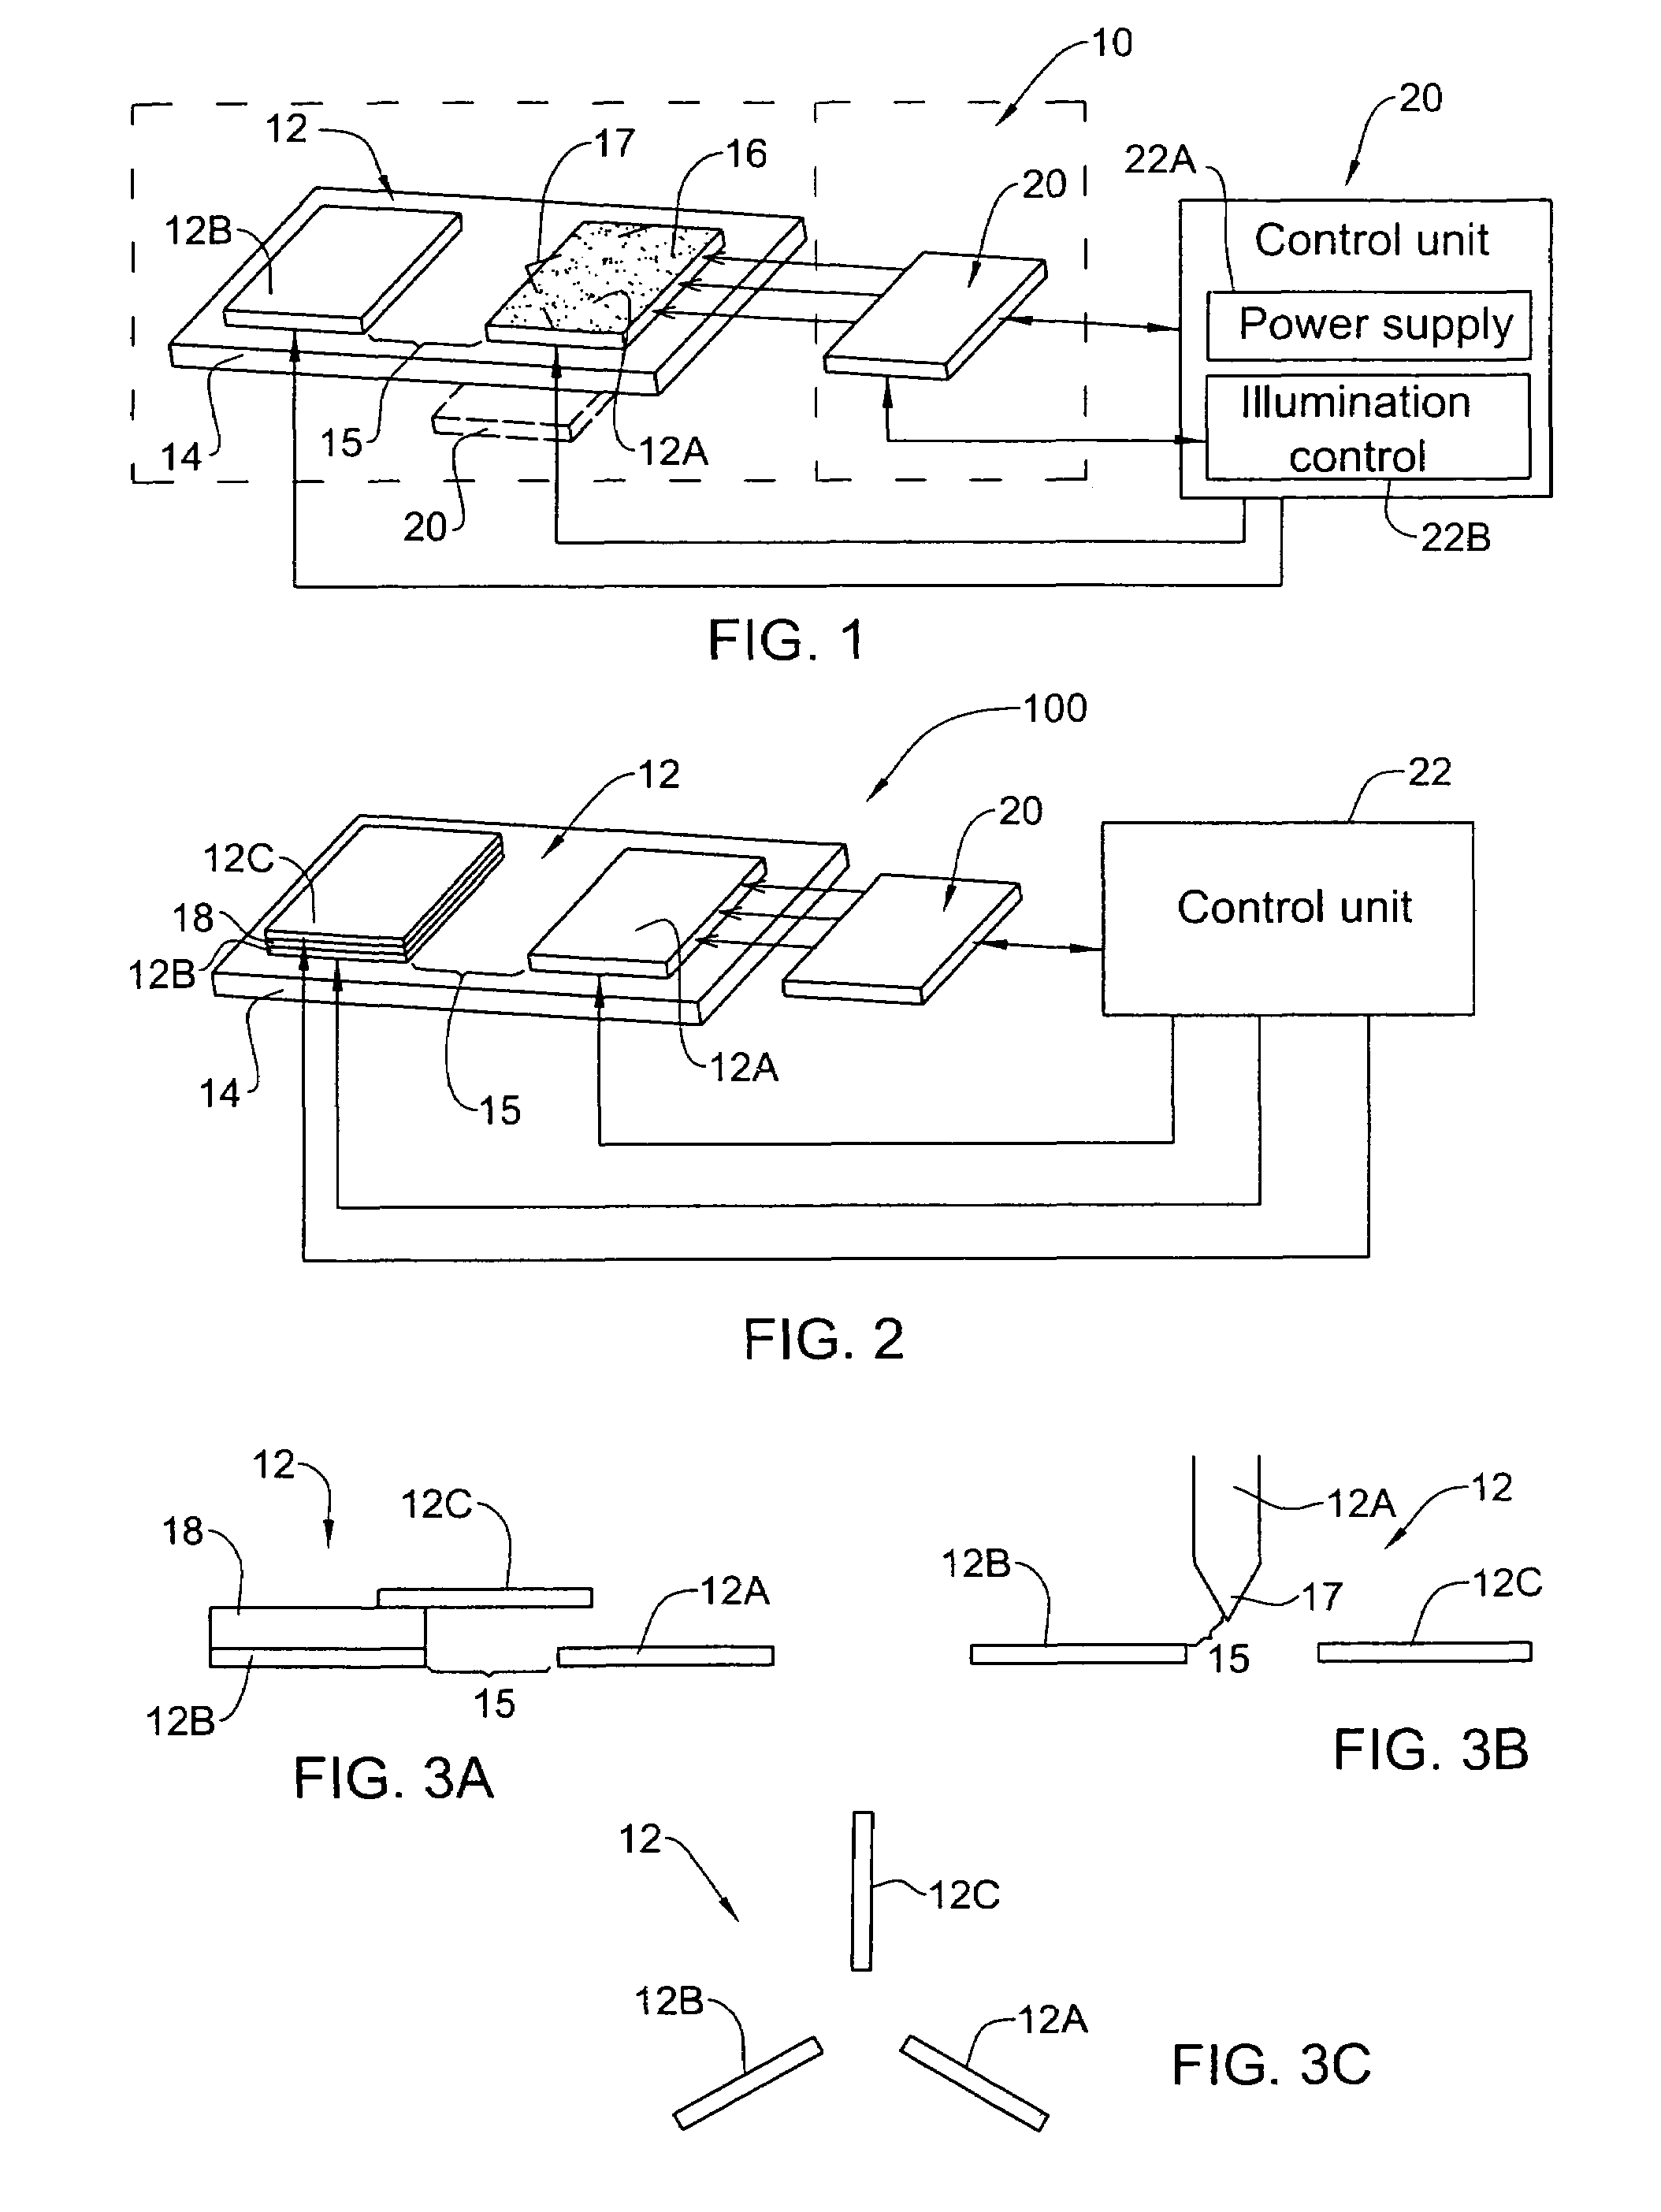 Electronic switching device